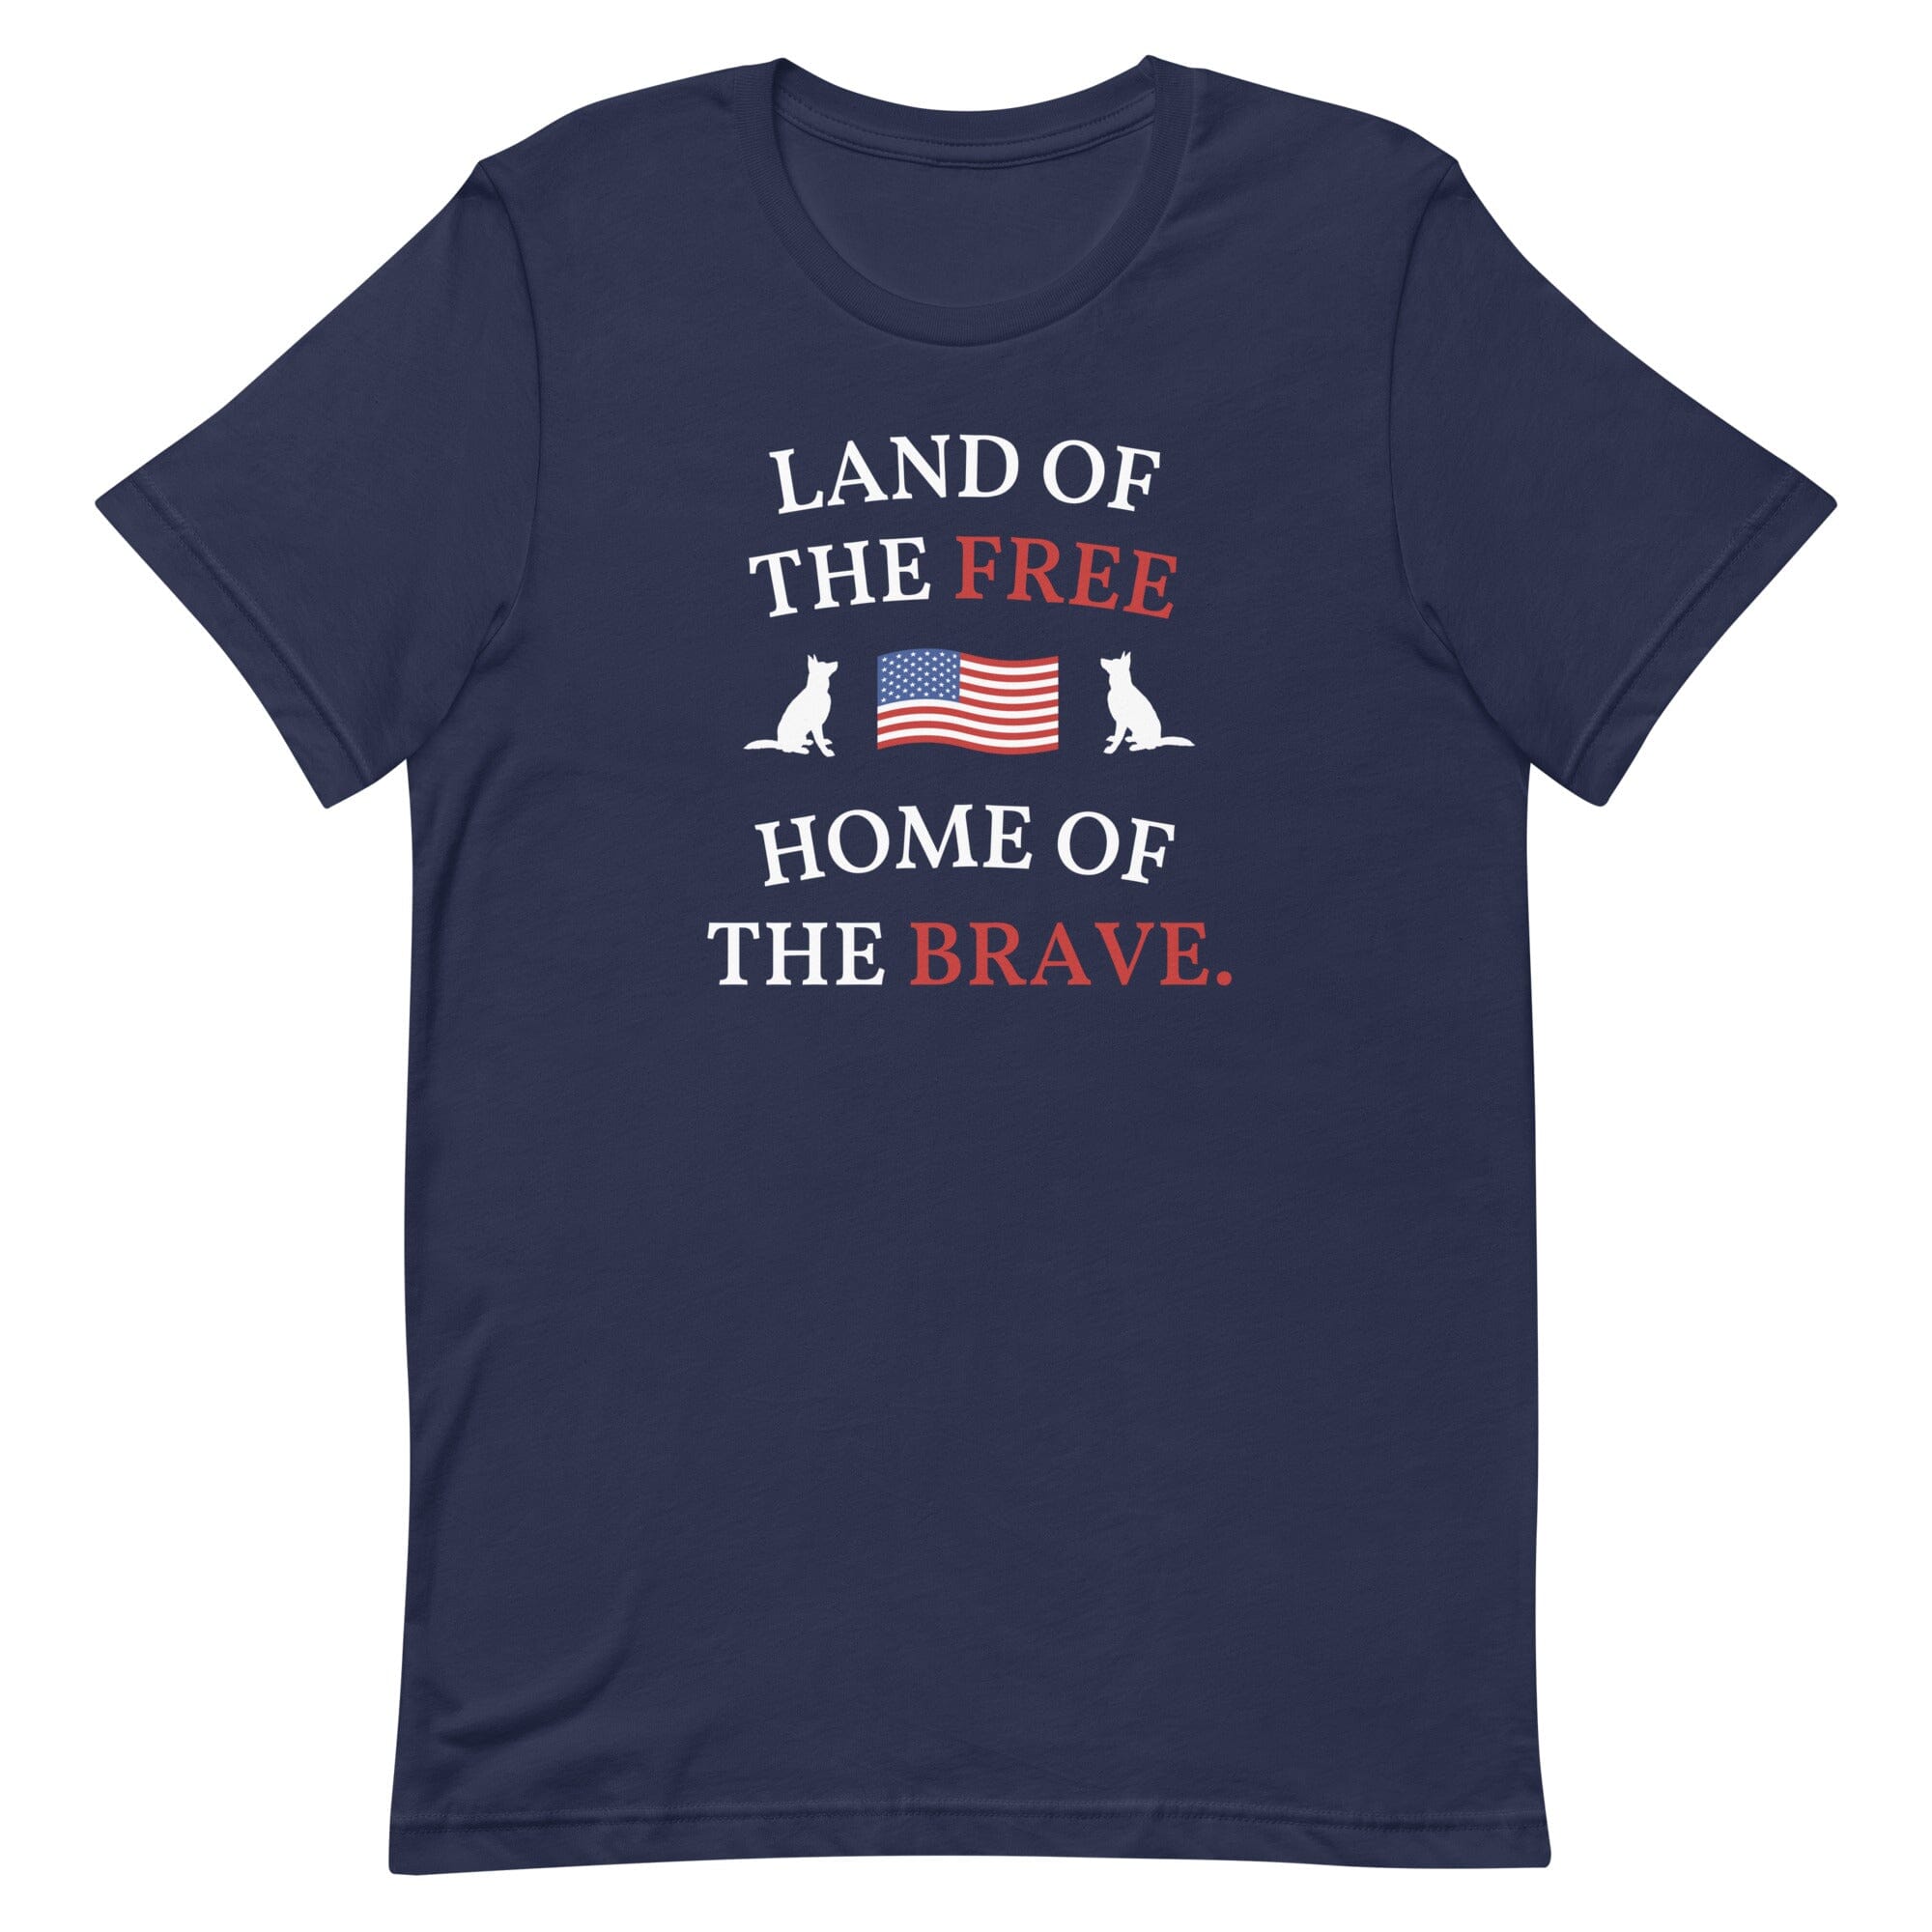 Home of the Brave (Uni T)